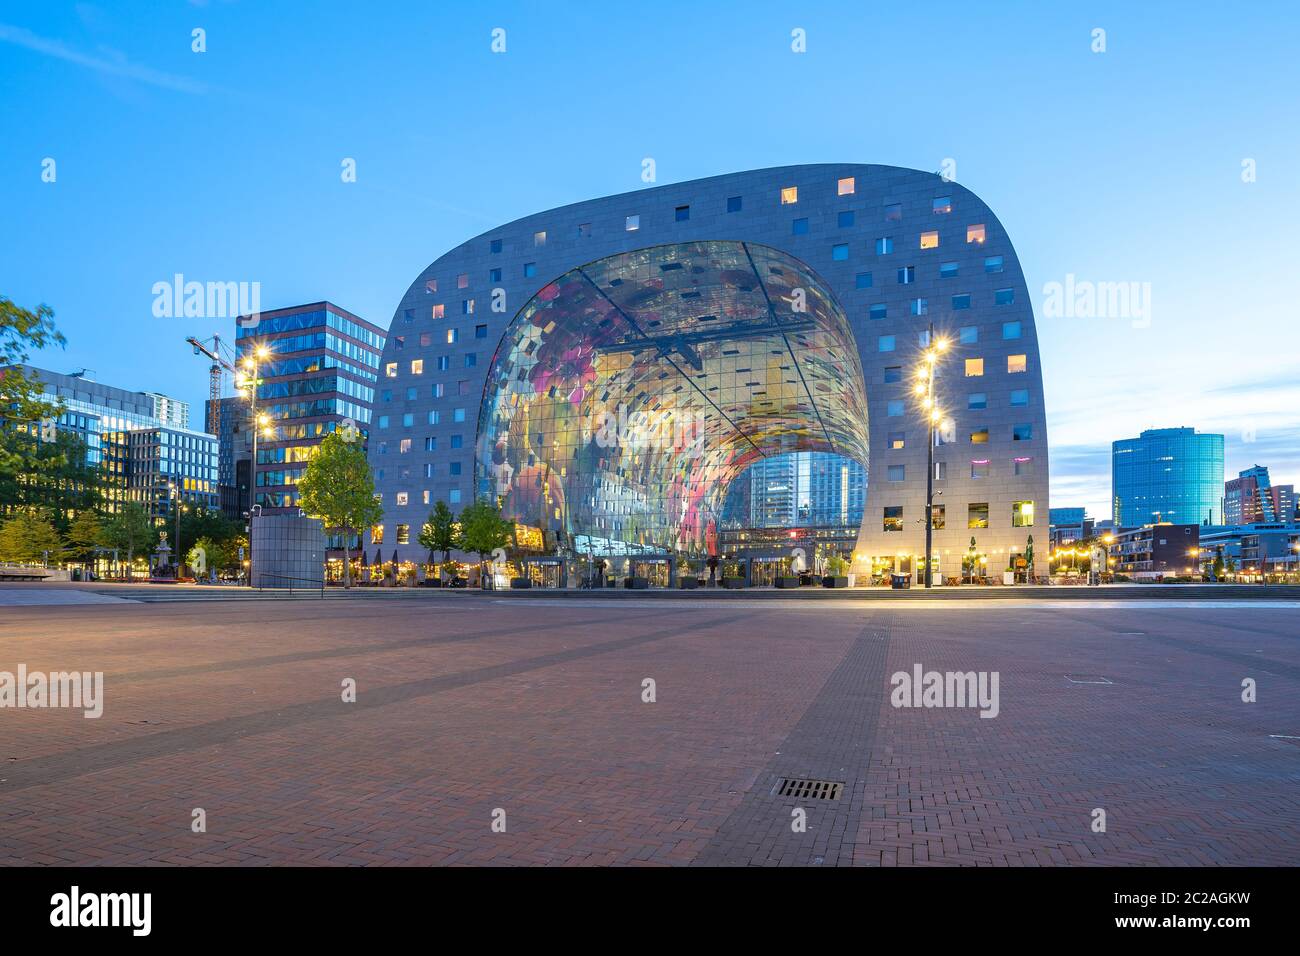 The Markthal at night in Rotterdam city, Netherlands. Stock Photo